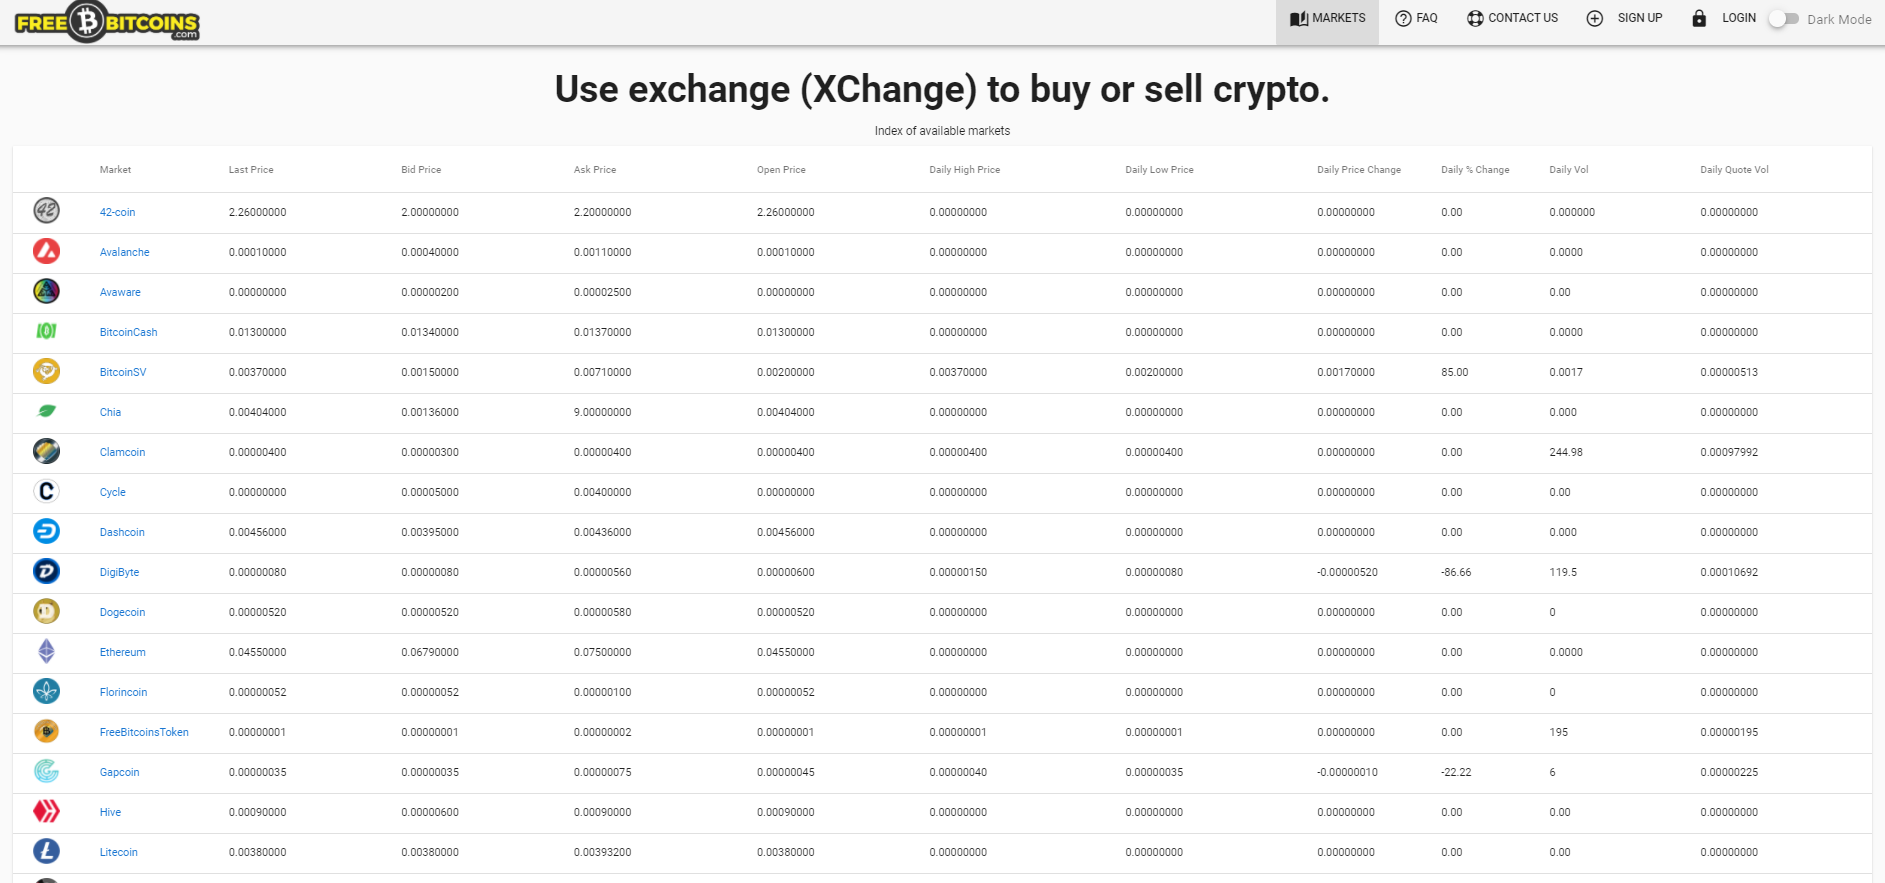 FreeBitcoins Centralize Altcoin Exchange Screenshot Image